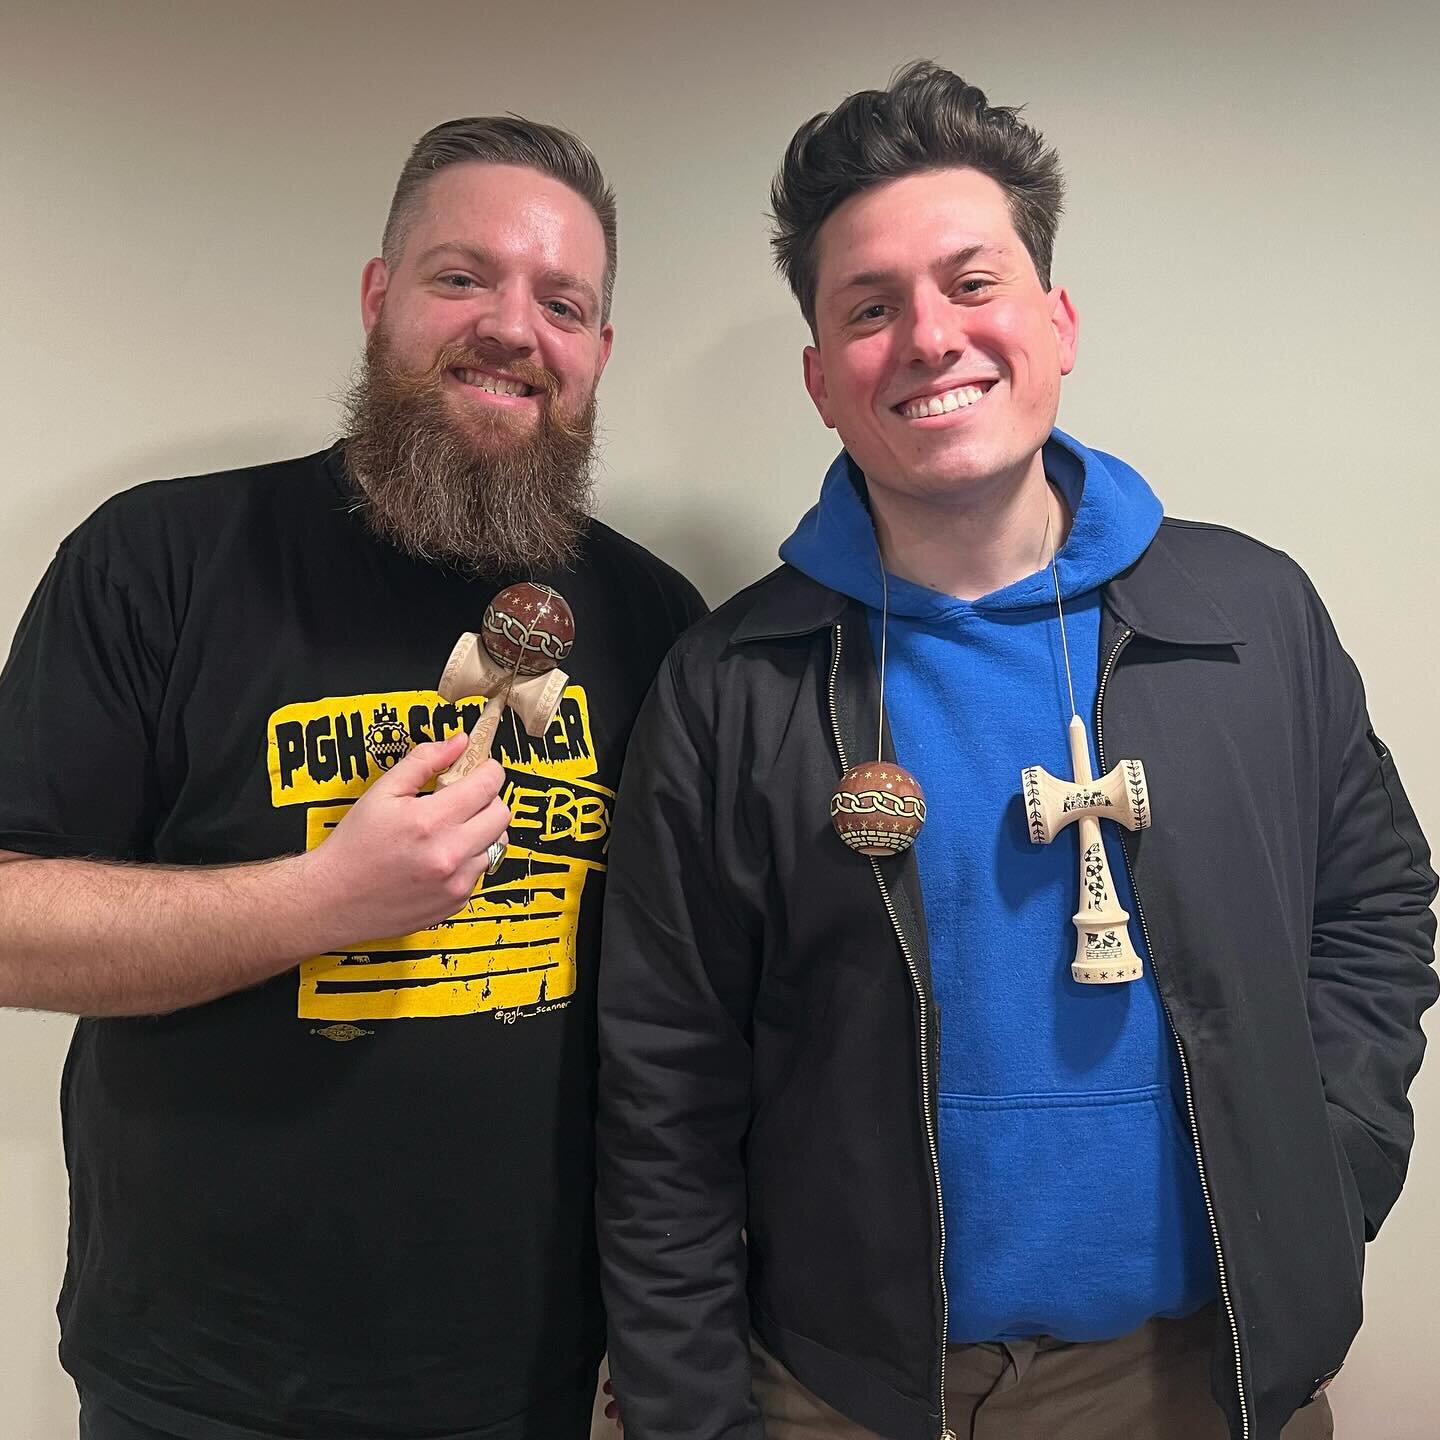 This week, I sit down with @kromkendama Pro Player and best friend @bryan_scagline to celebrate all of his hard work and his accomplishments. Bryan has been a well known figure spreading positivity in the Kendama community for over a decade. Starting